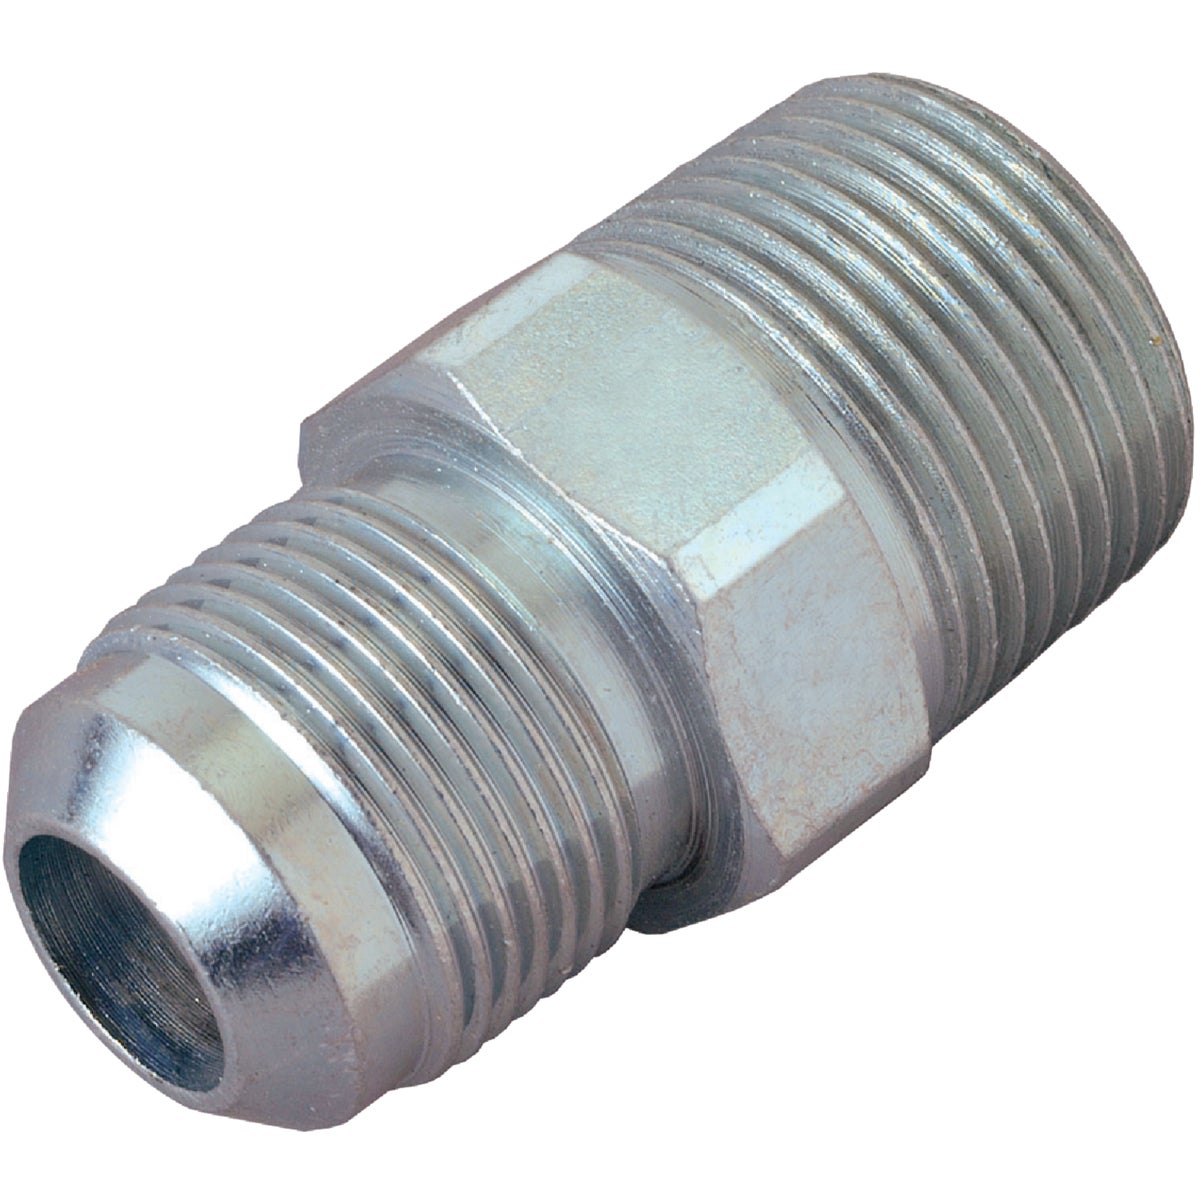 Dormont 1/2 In. OD Flare x 1/2 In. MIP (tapped 3/8 In. FIP) Zinc-Plated Carbon Steel Adapter Gas Fitting